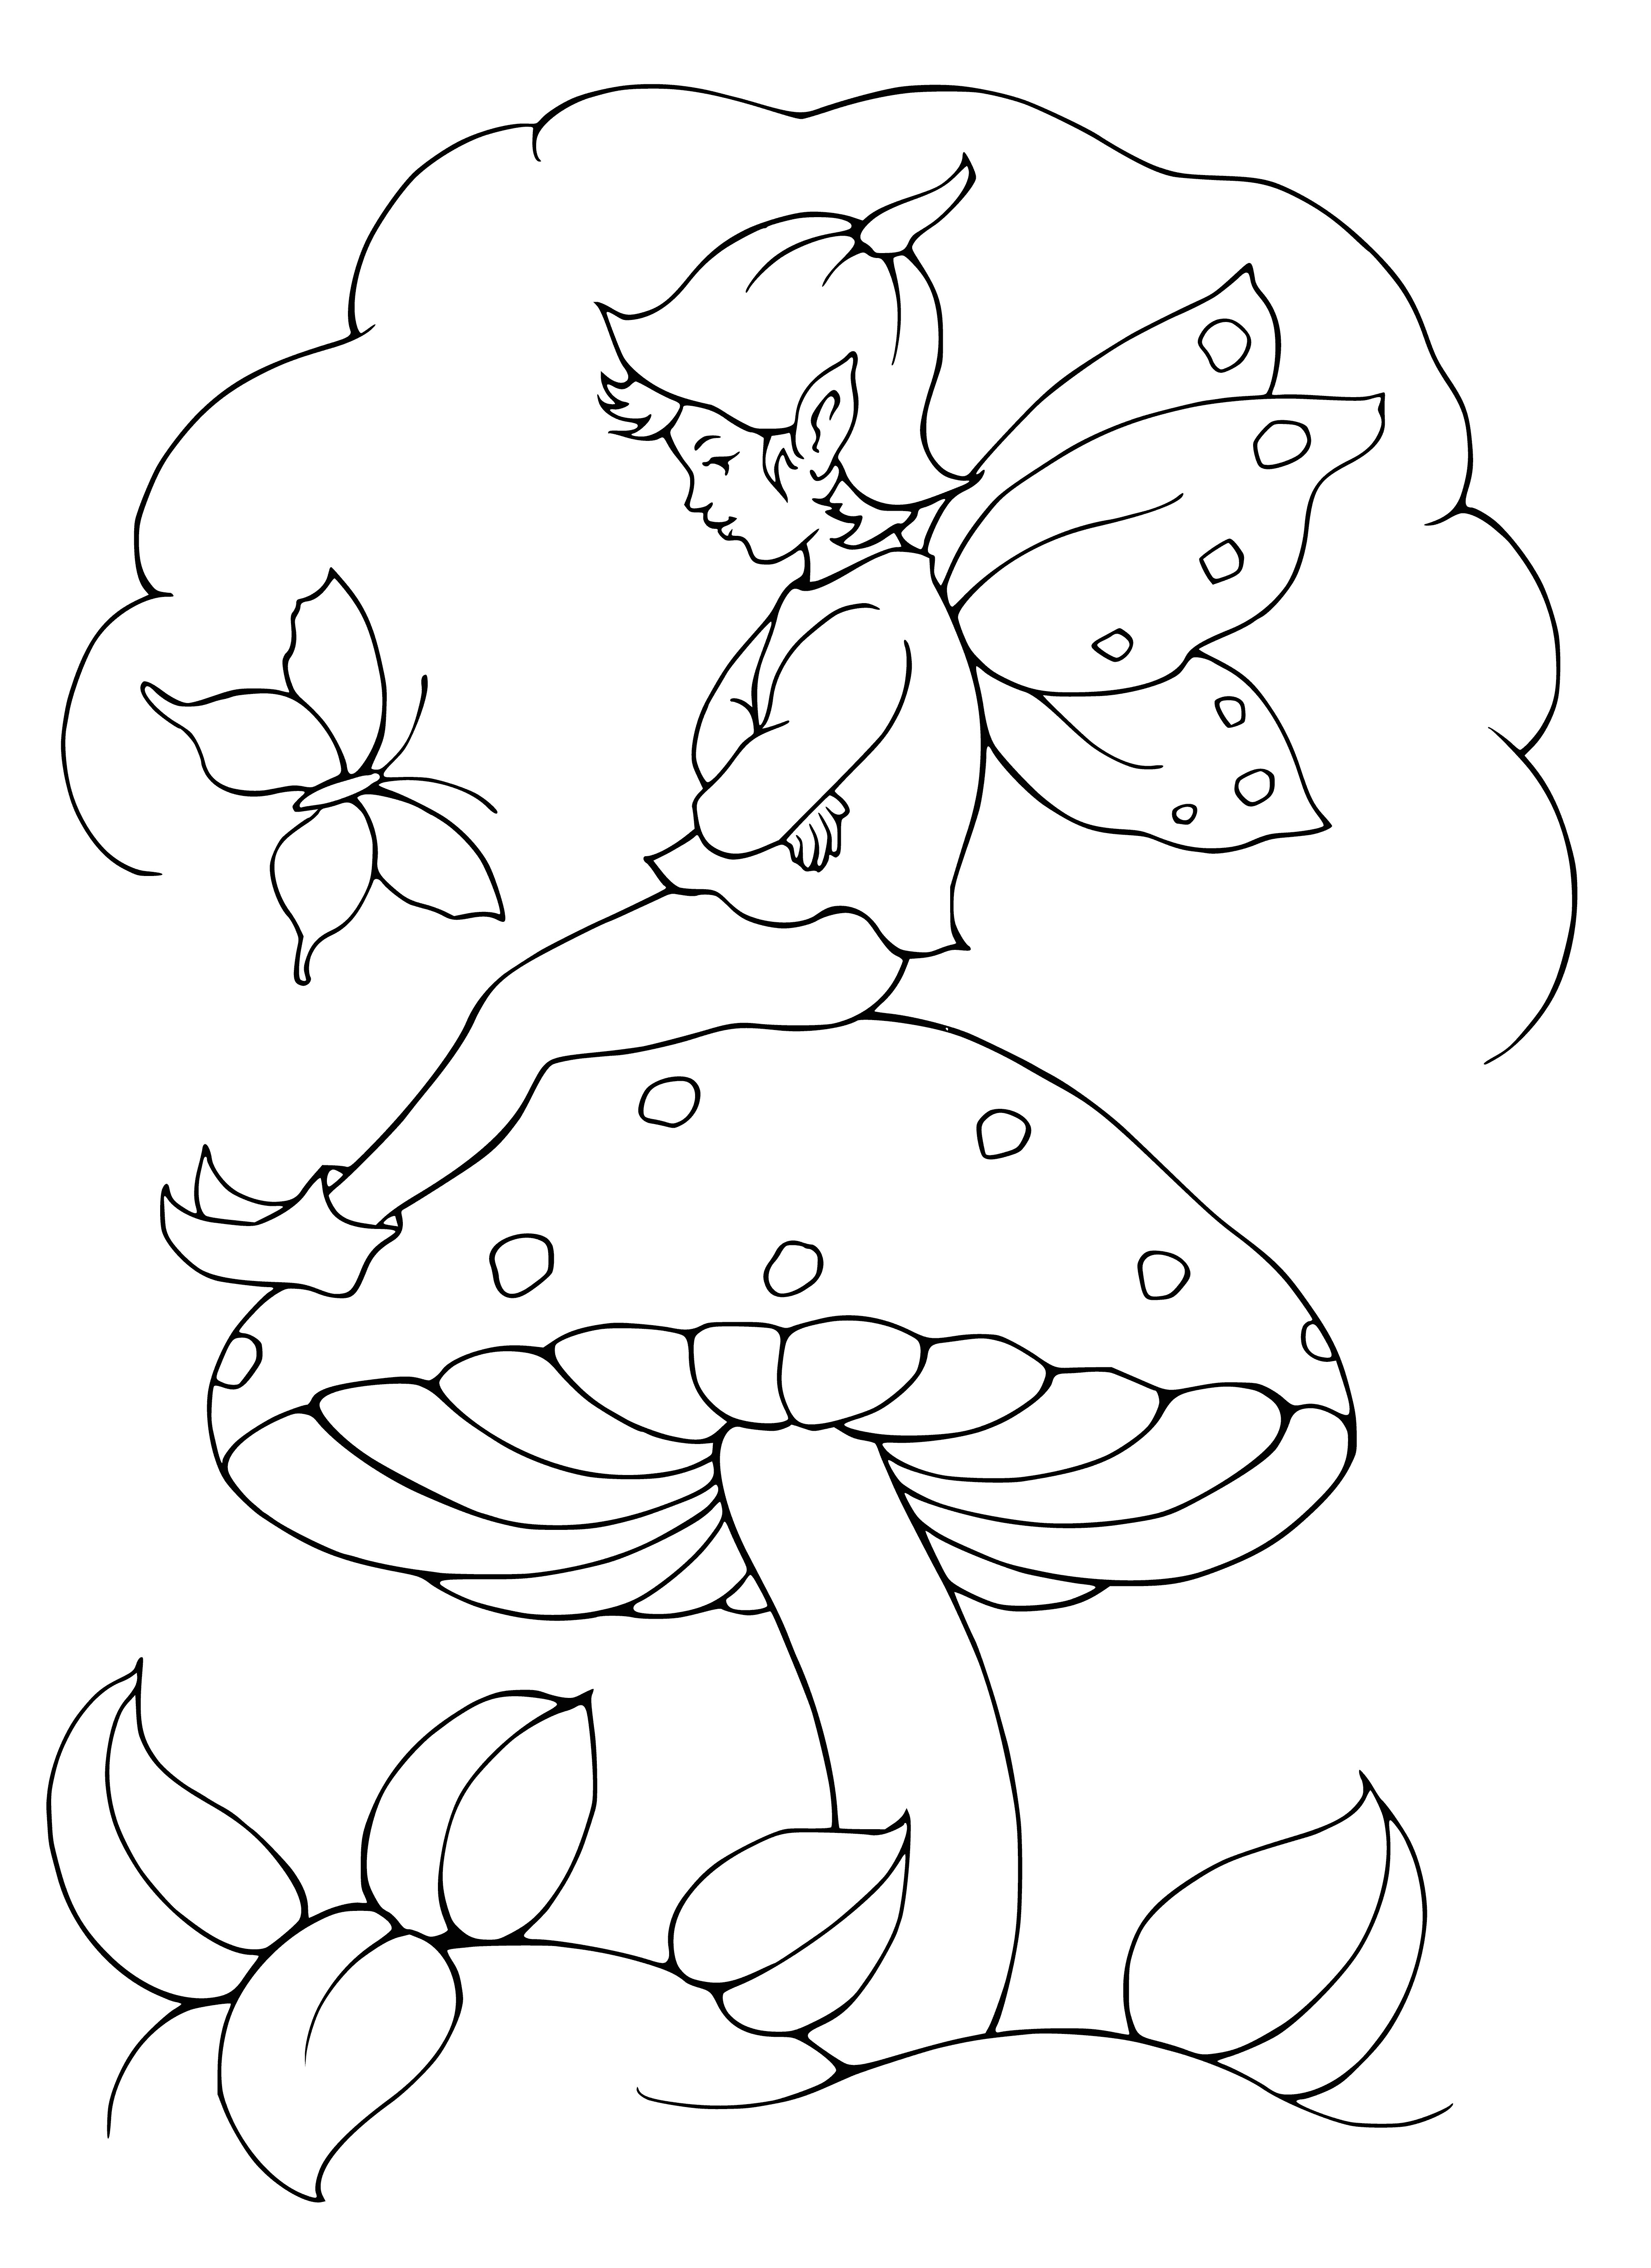 Elf on the mushroom coloring page